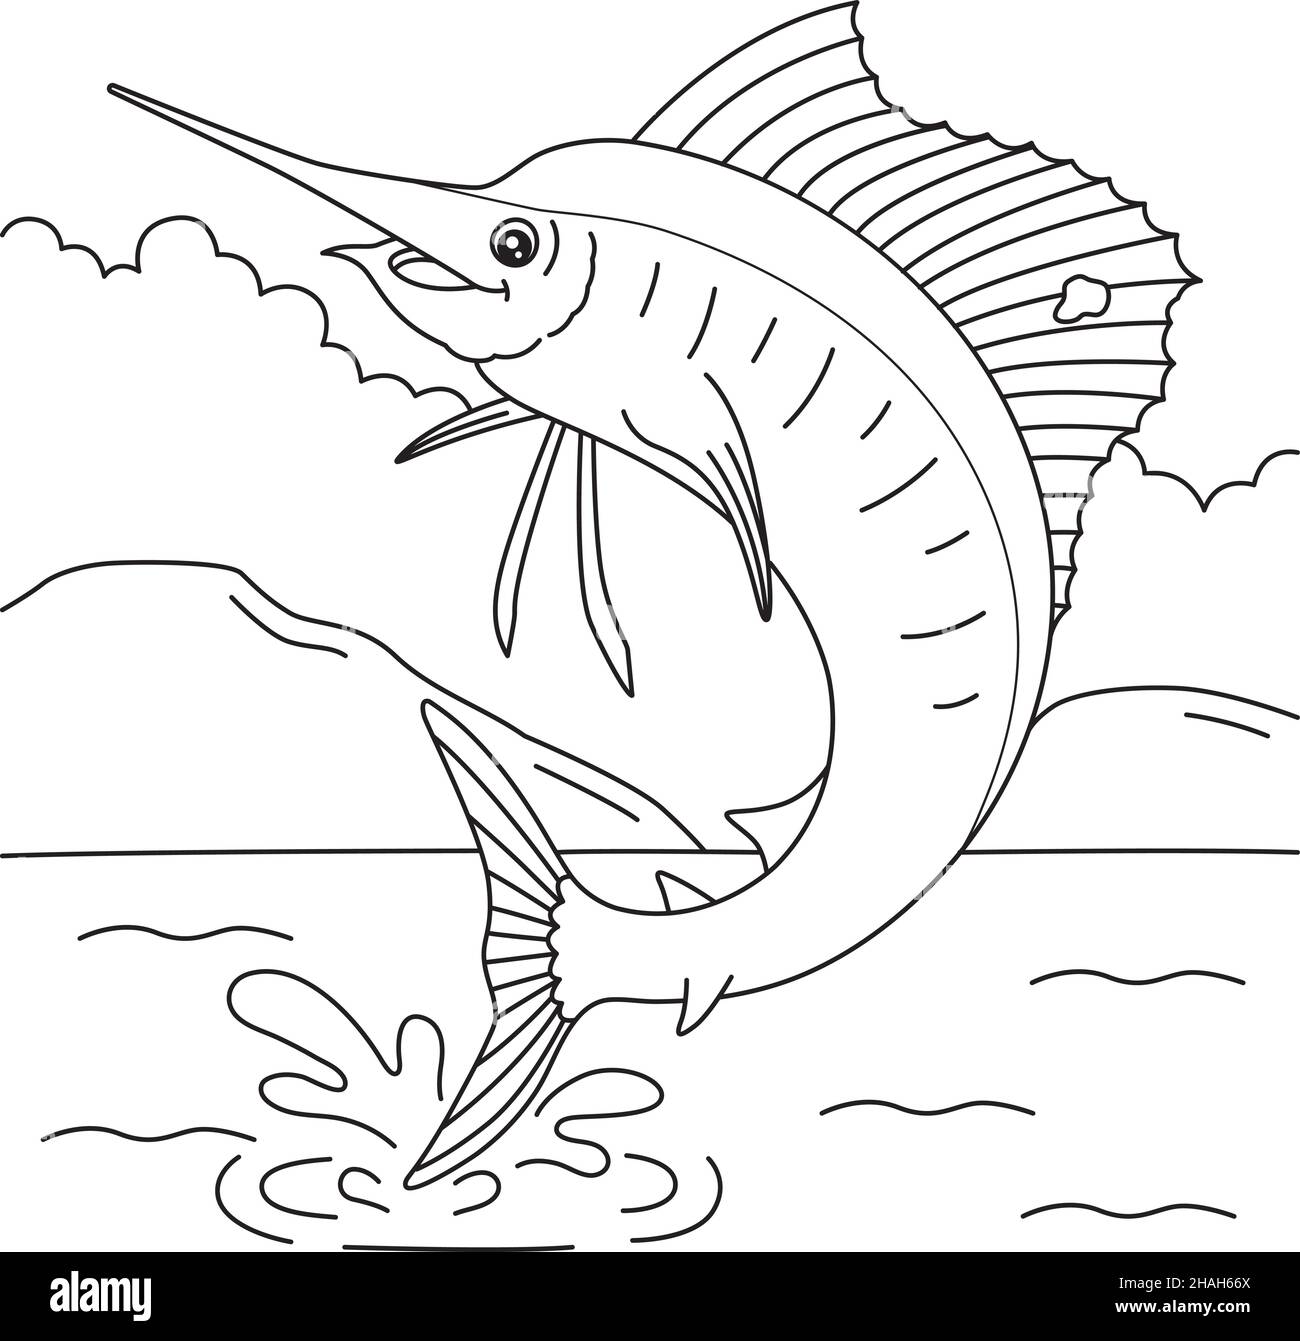 Sailfish Coloring Page for Kids Stock Vector